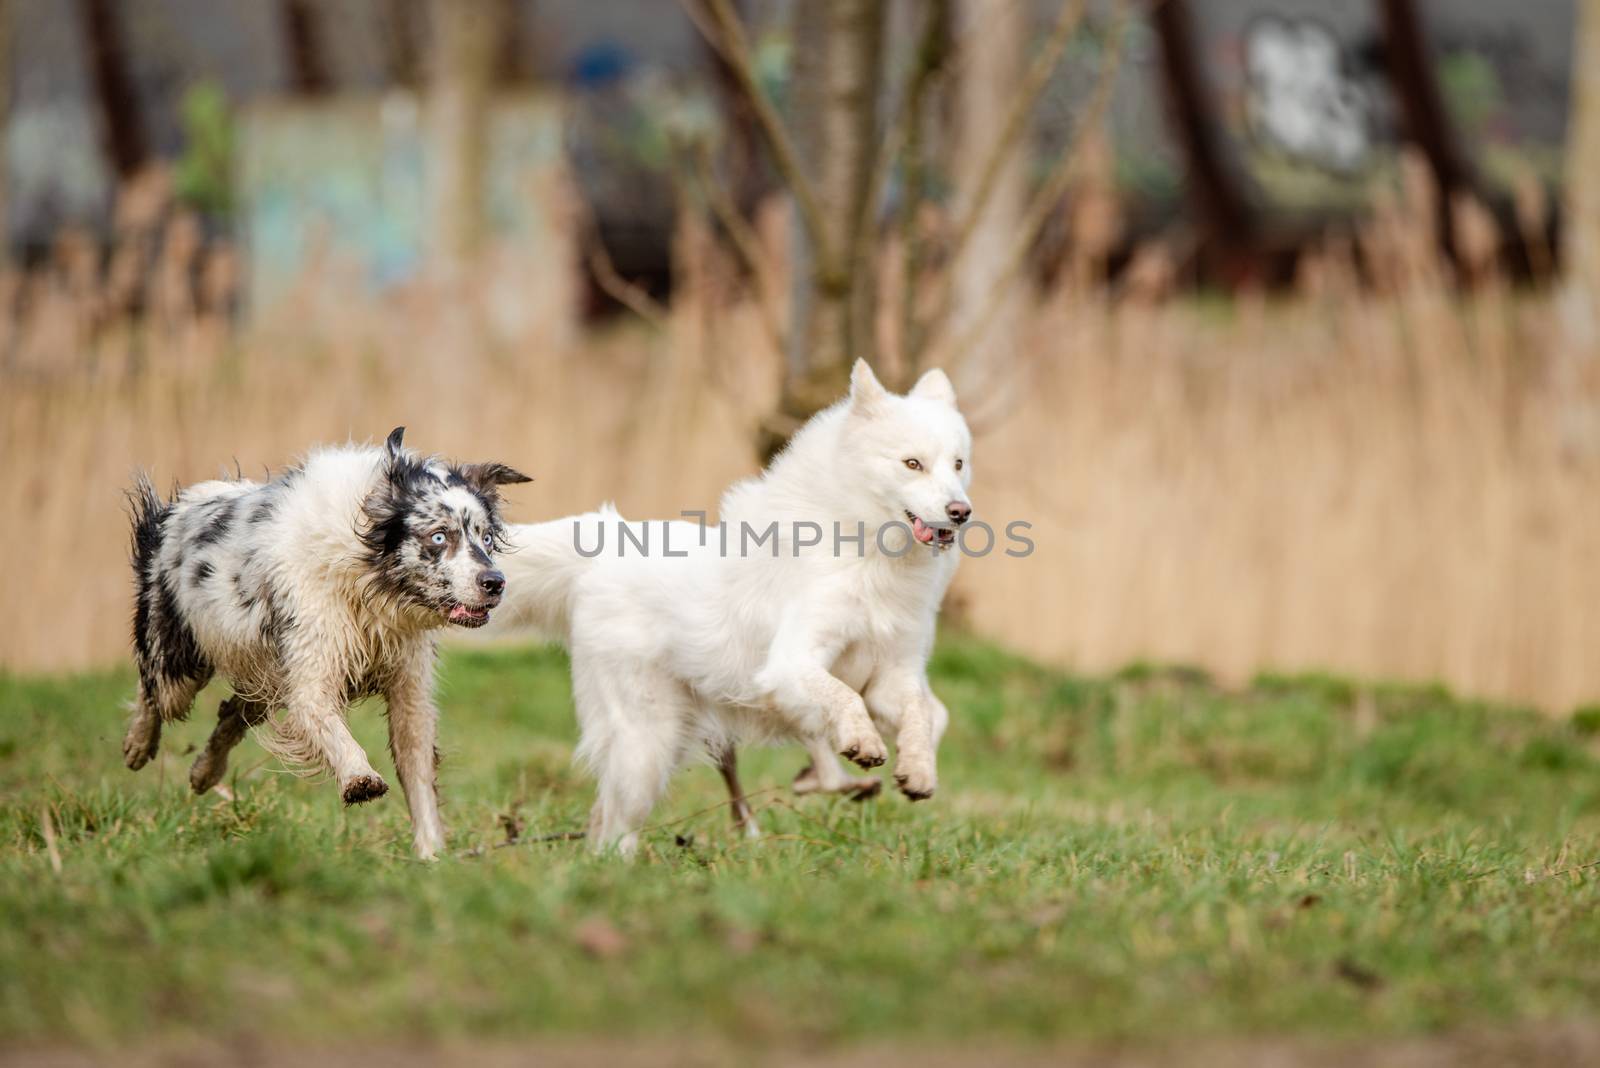 Cute, fluffy white Samoyed dog and a blue merle Border Collie run together